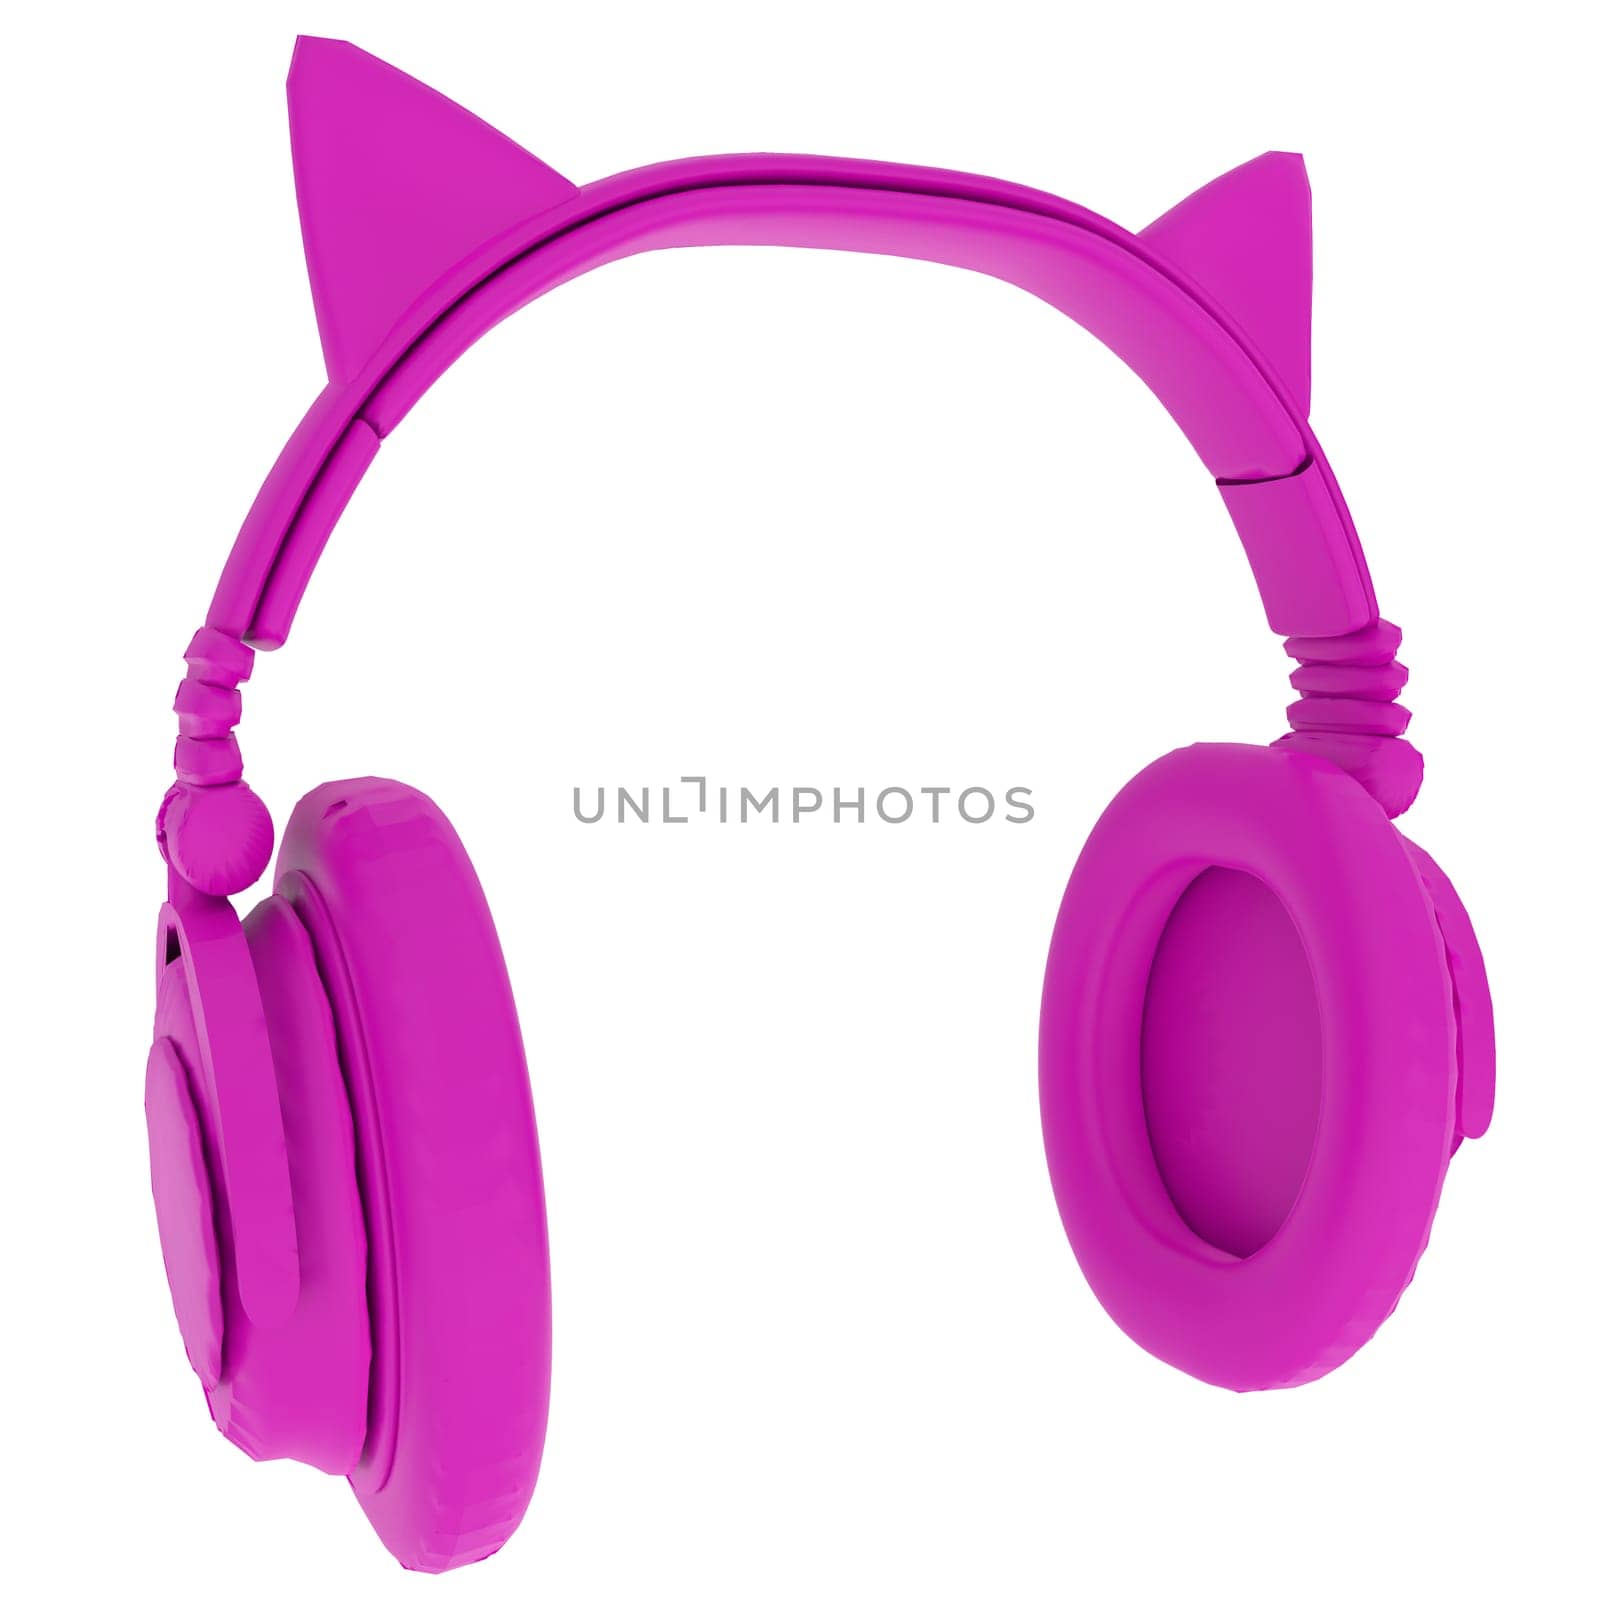 Cat Ear Headphones isolated on white background. High quality 3d illustration